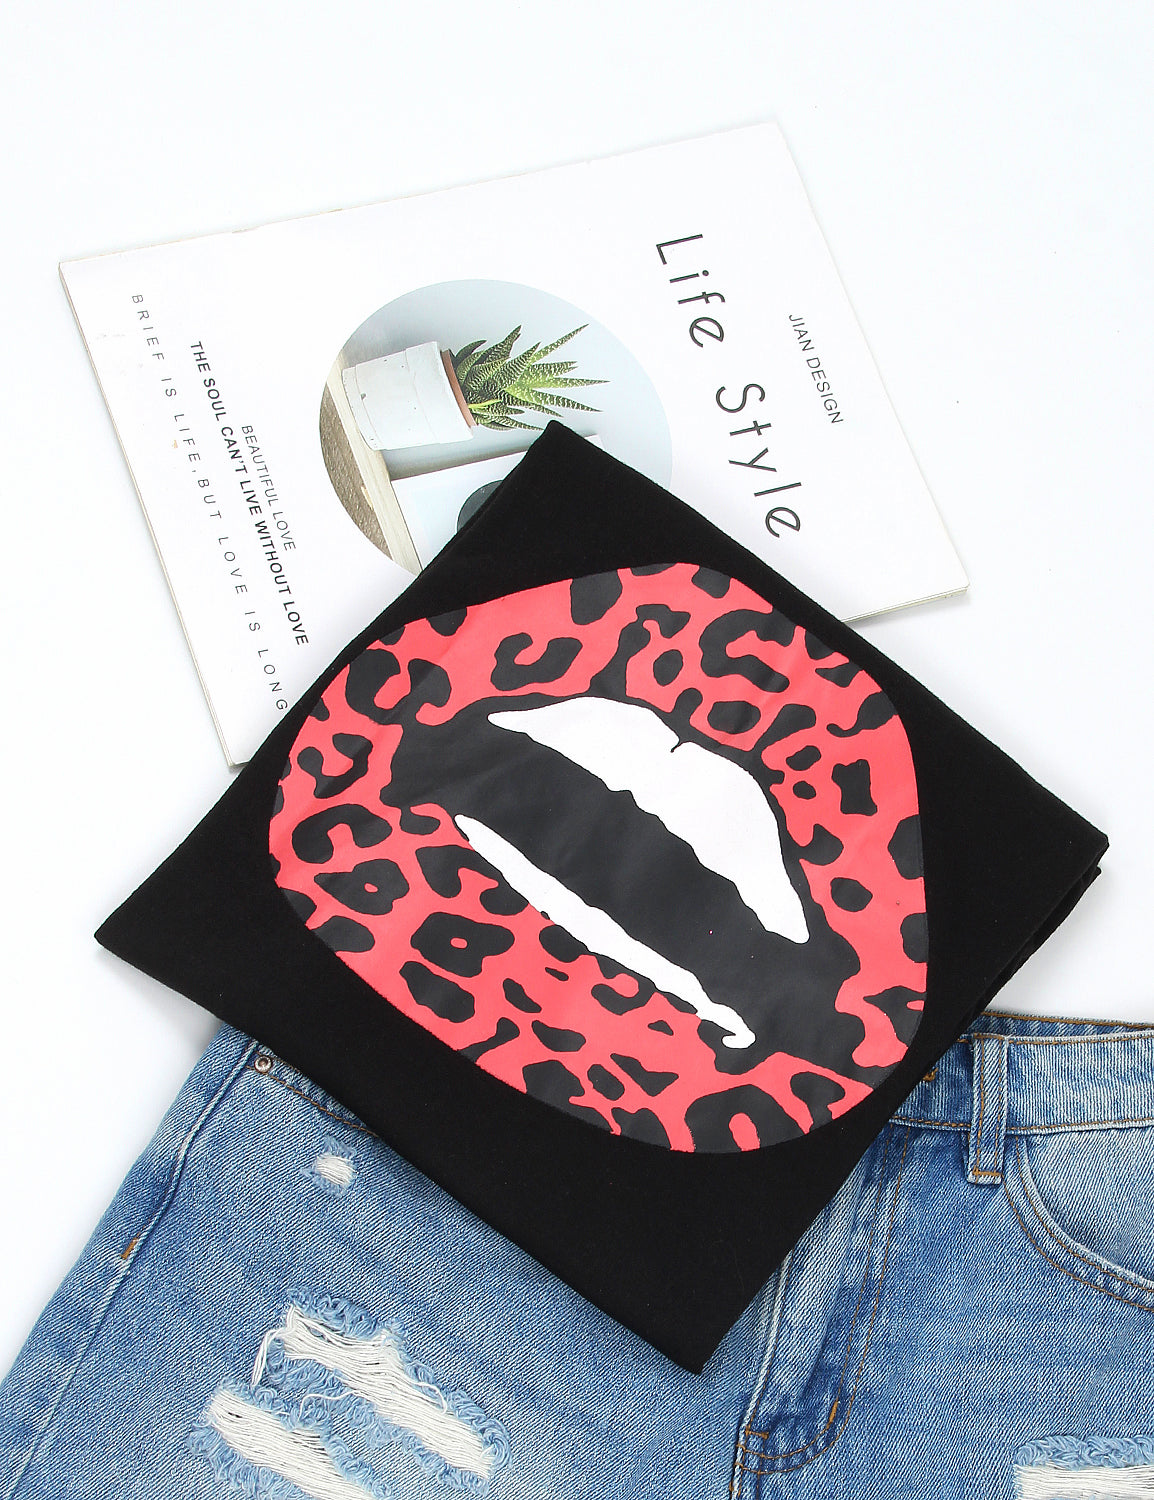 Blooming Jelly_Cute Leopard Red Lip T-Shirt_Graphic Print_154110_02_Women Casual Summer Wear_Tops_T-Shirt